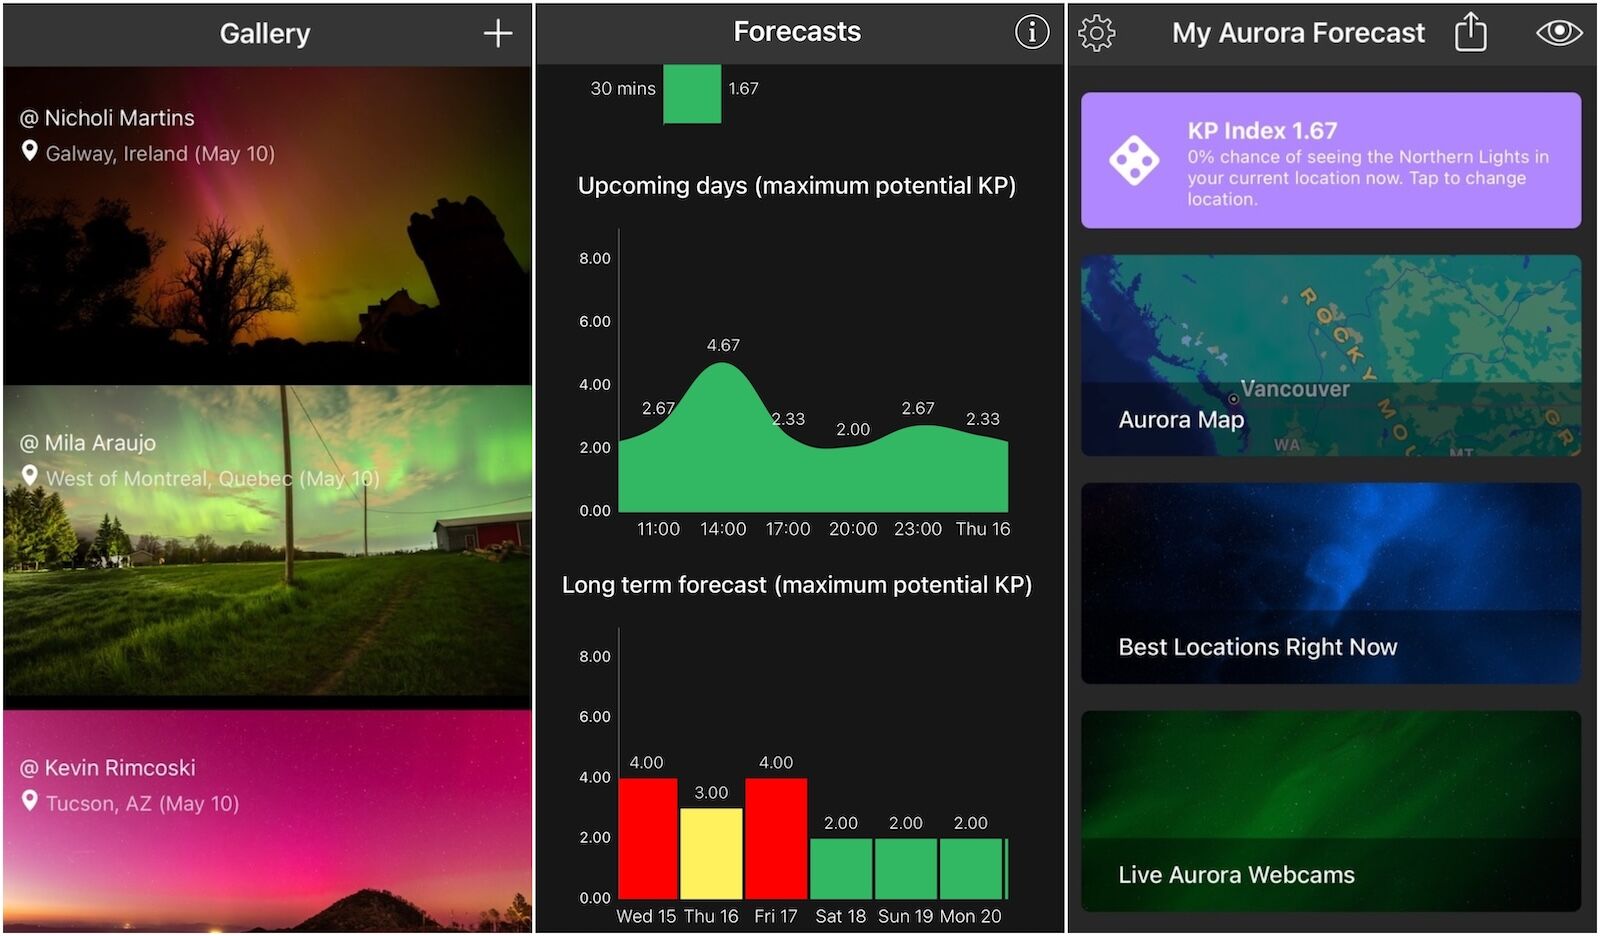 Don't miss the northern lights next time with this forecast and alerts app